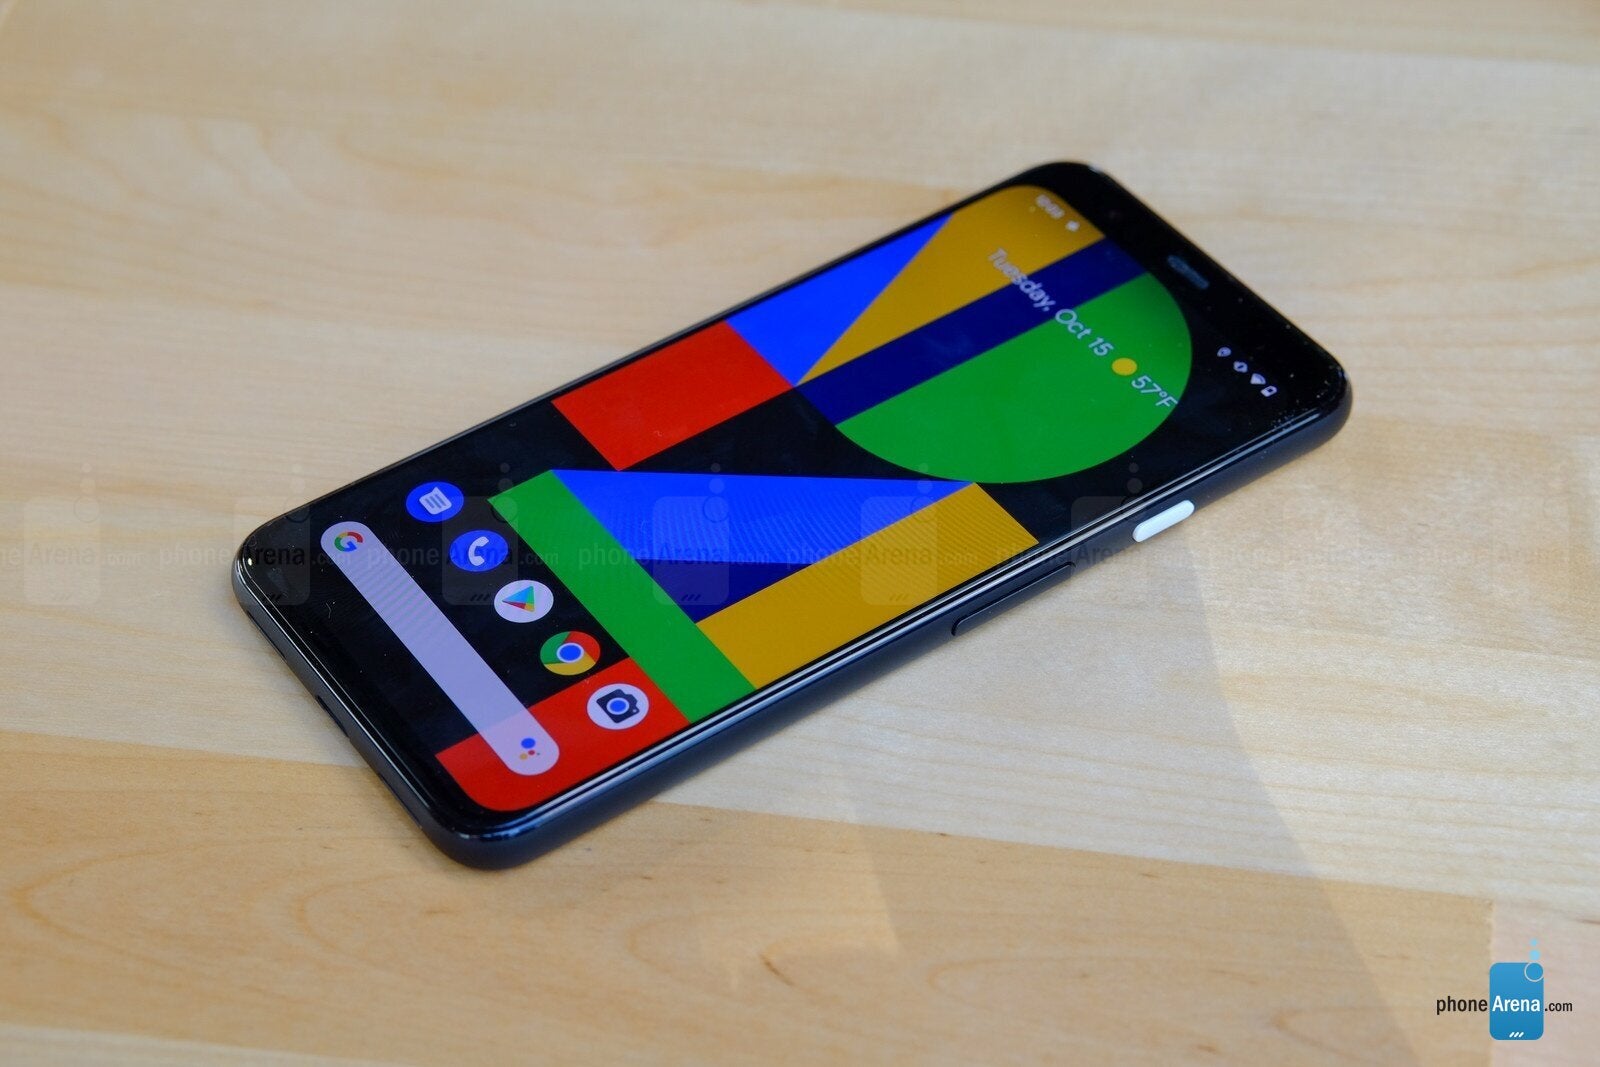 Ok Google, so when is the Pixel 4a coming?